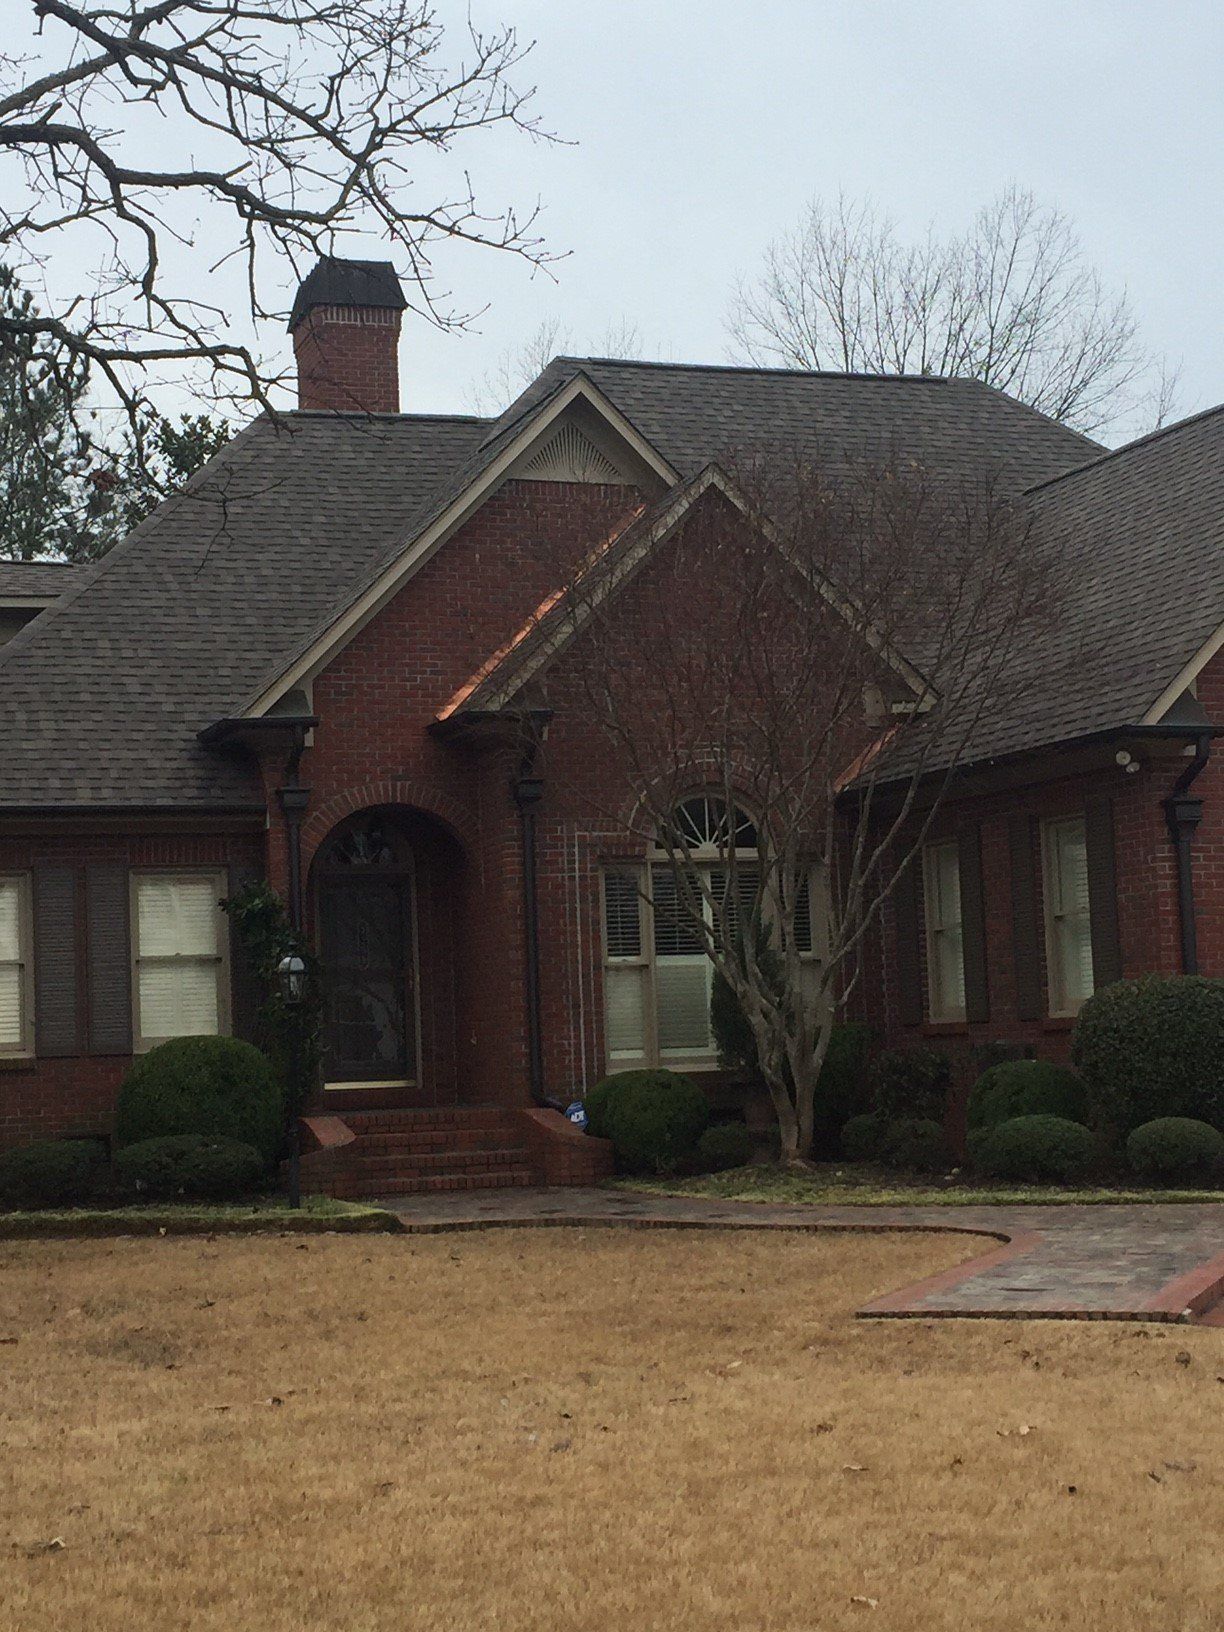 Brick home with new roof - B & B Roofing in Decatur, AL